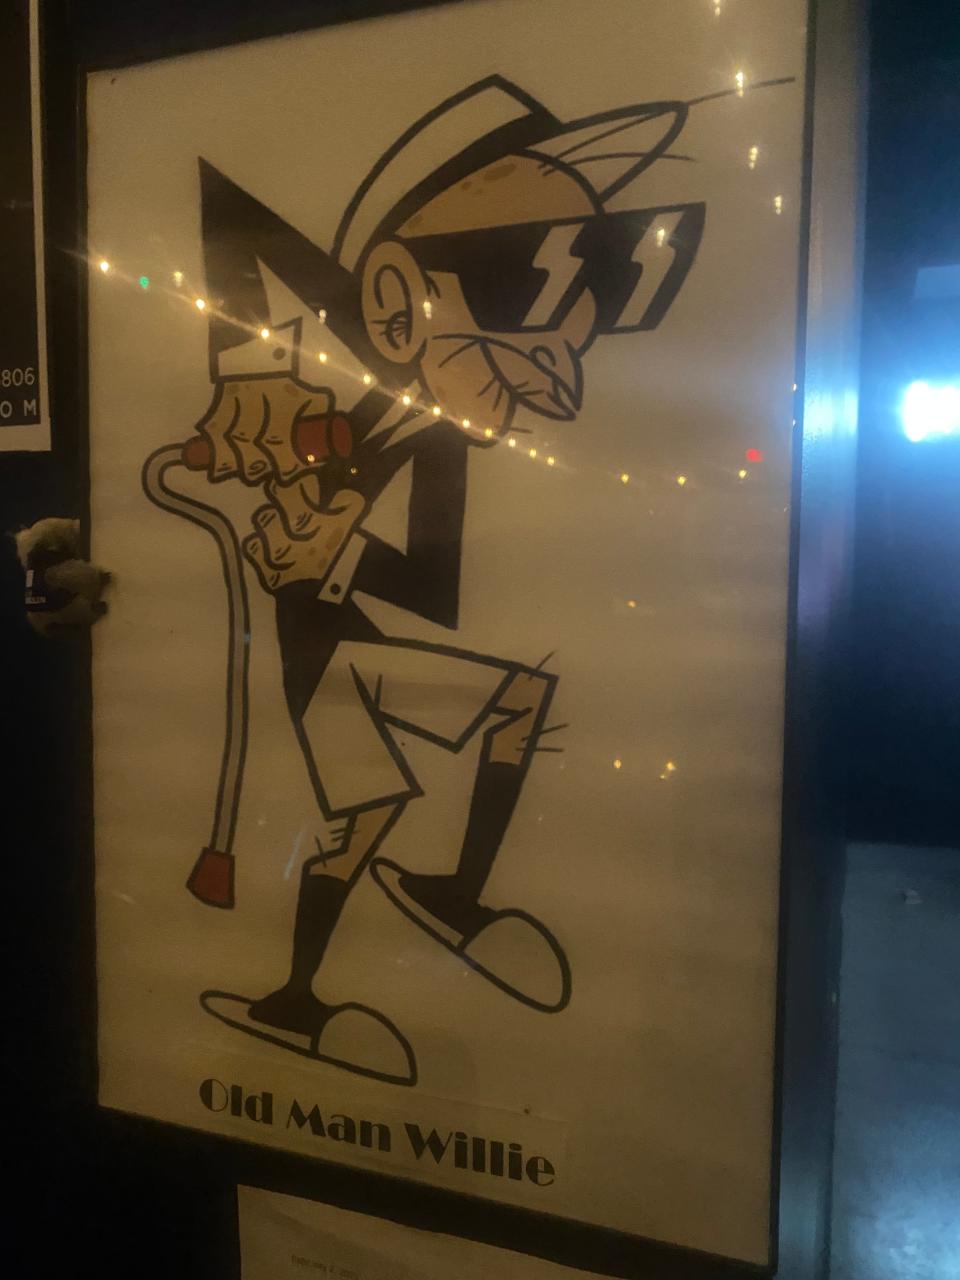 A caricature of "Old Man Willy" hangs near the bar of Blue Room Comedy Club.